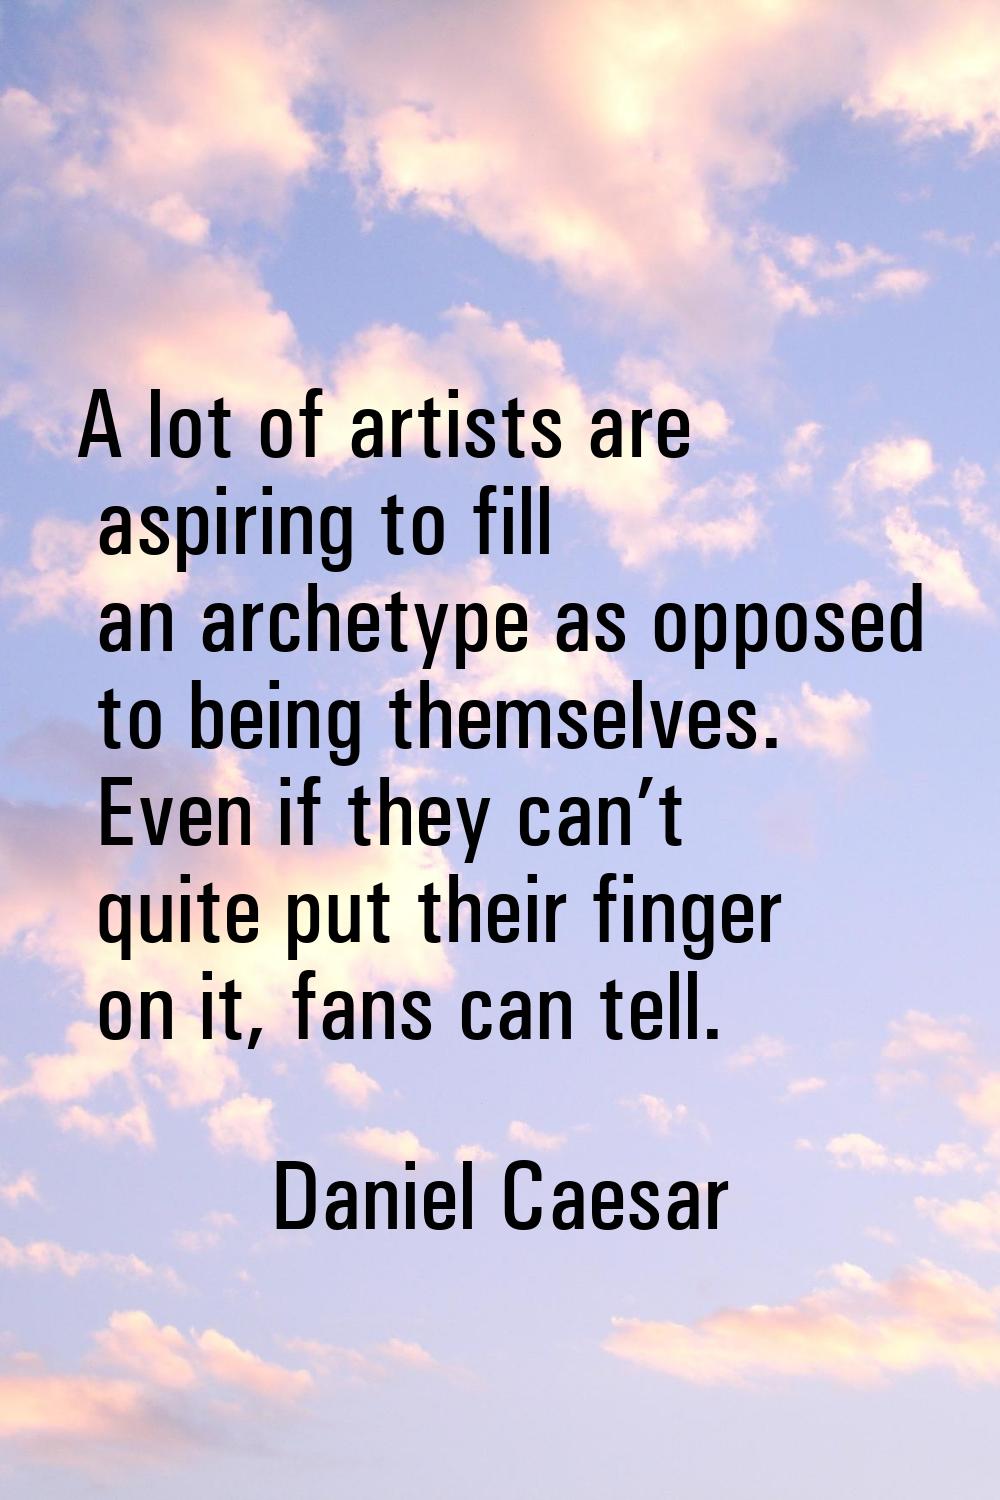 A lot of artists are aspiring to fill an archetype as opposed to being themselves. Even if they can